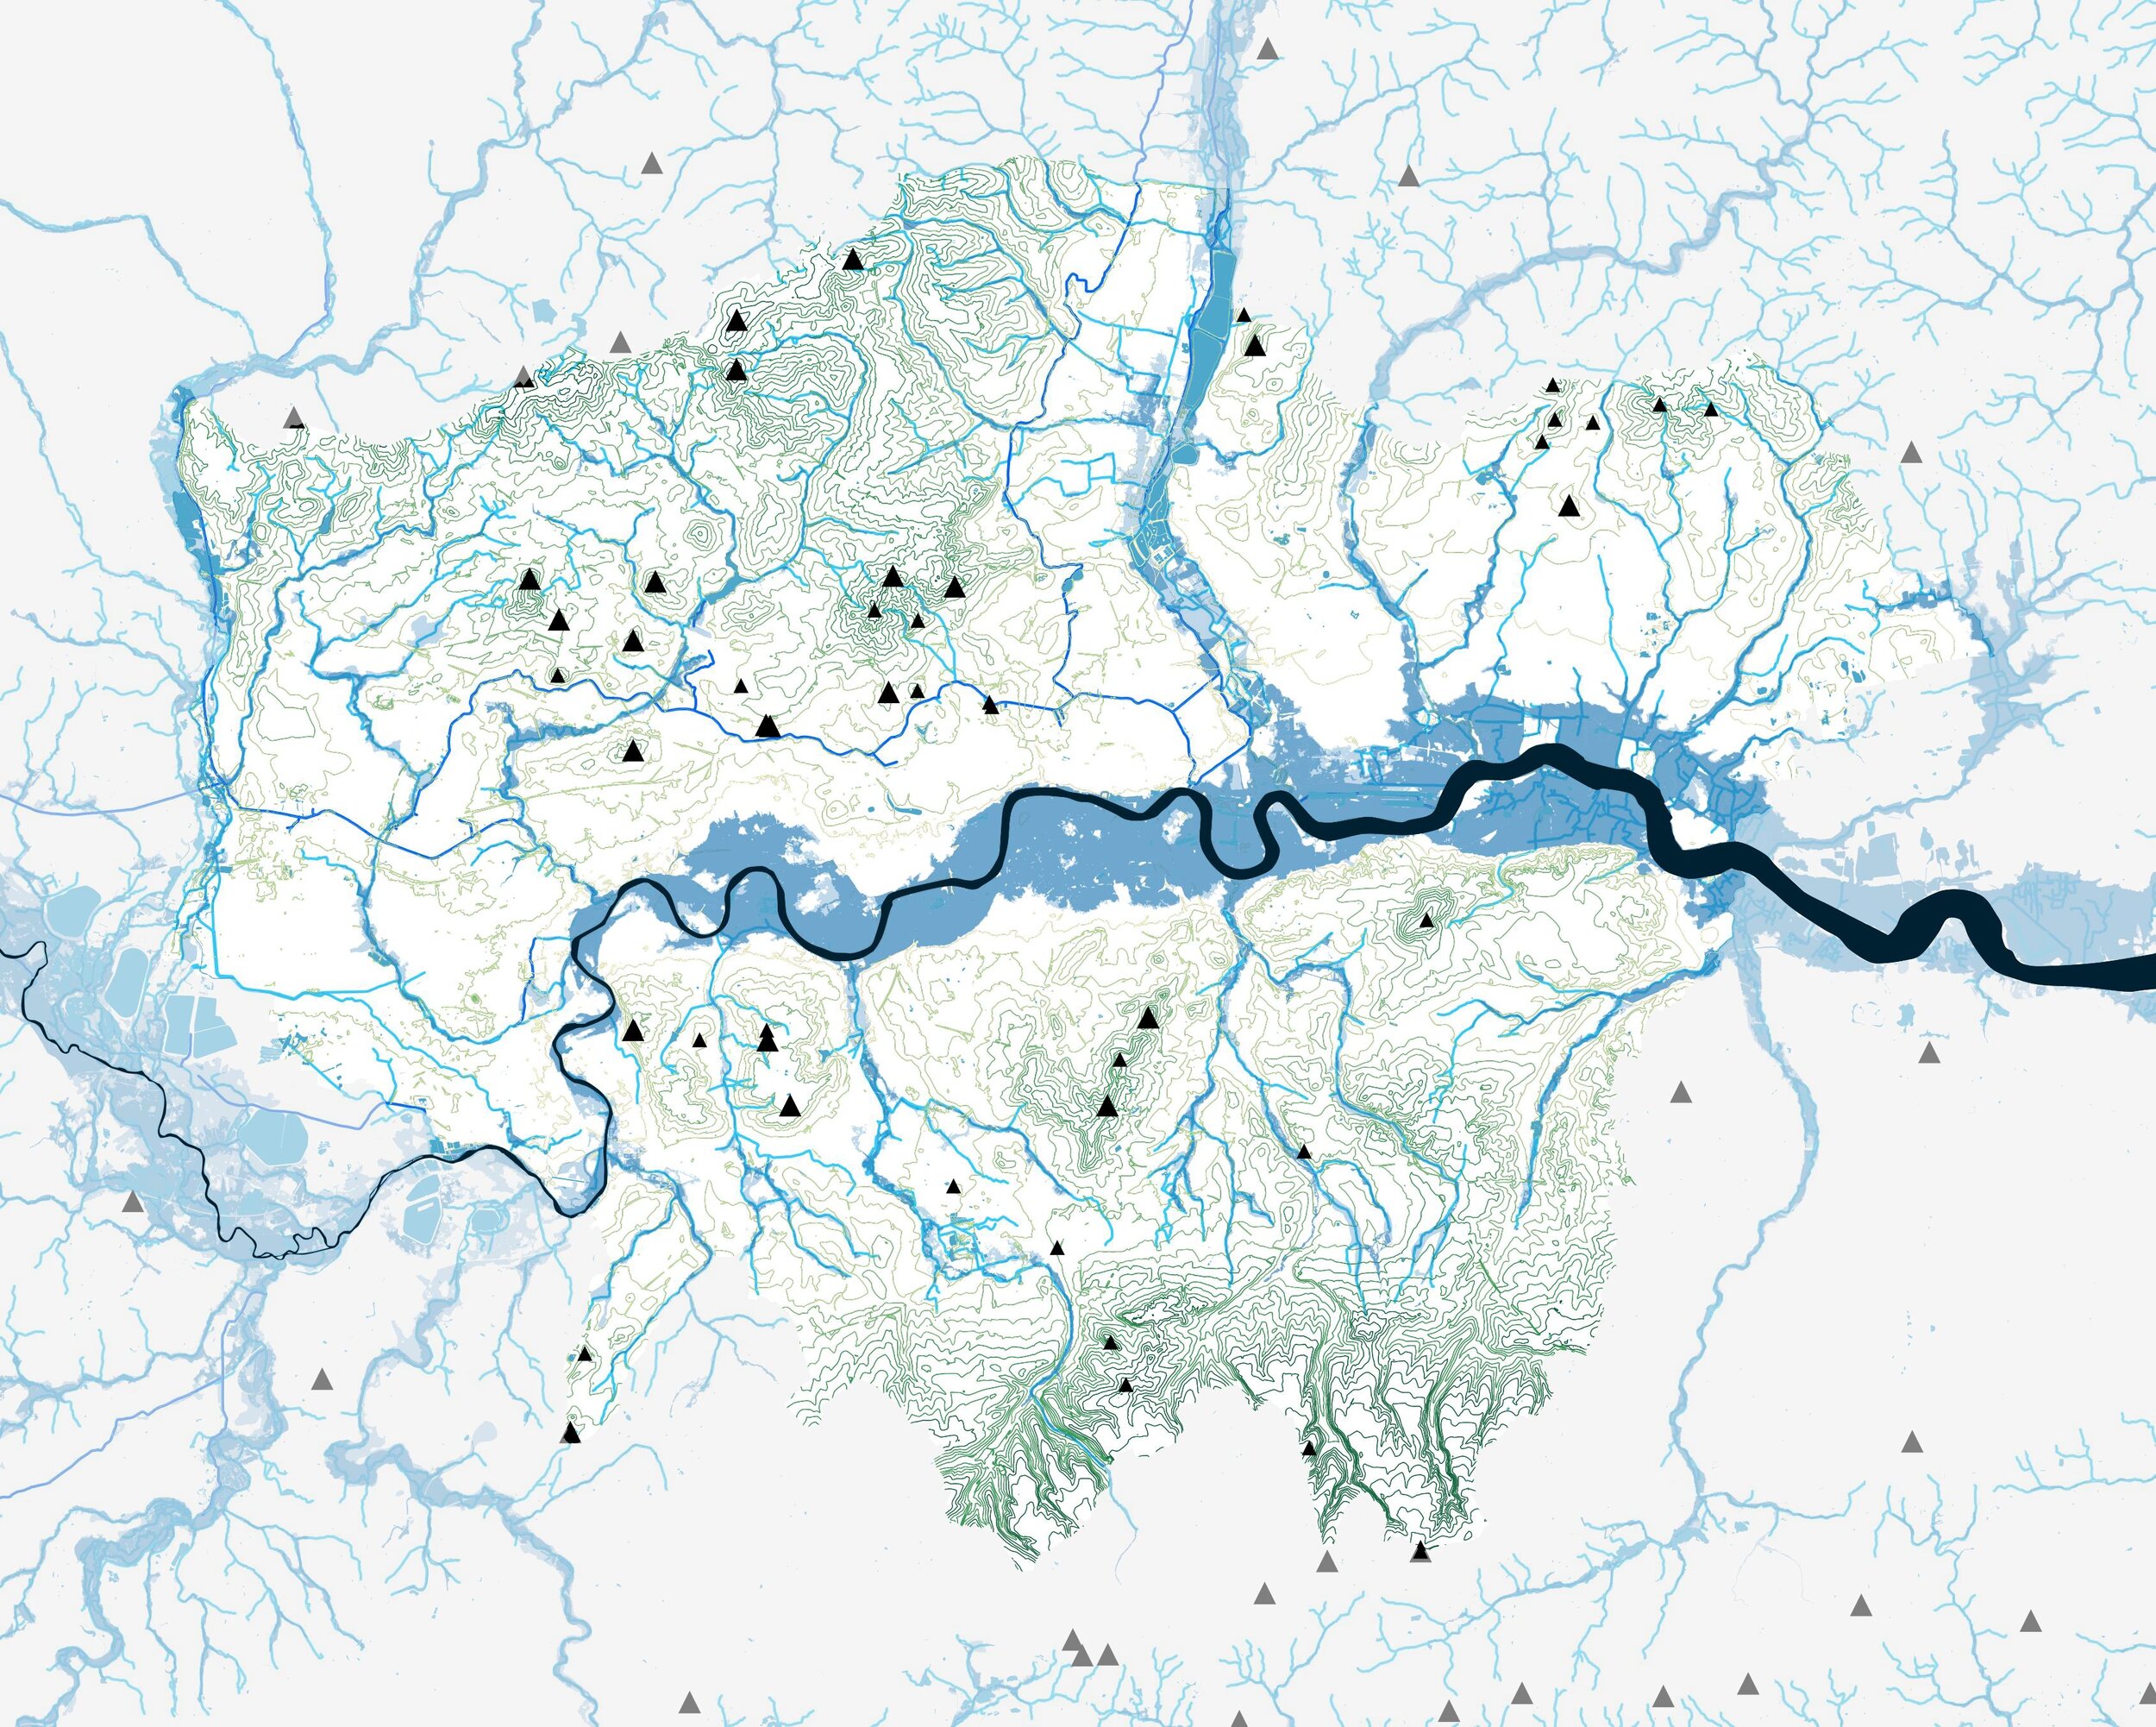 Thames and its tributaries